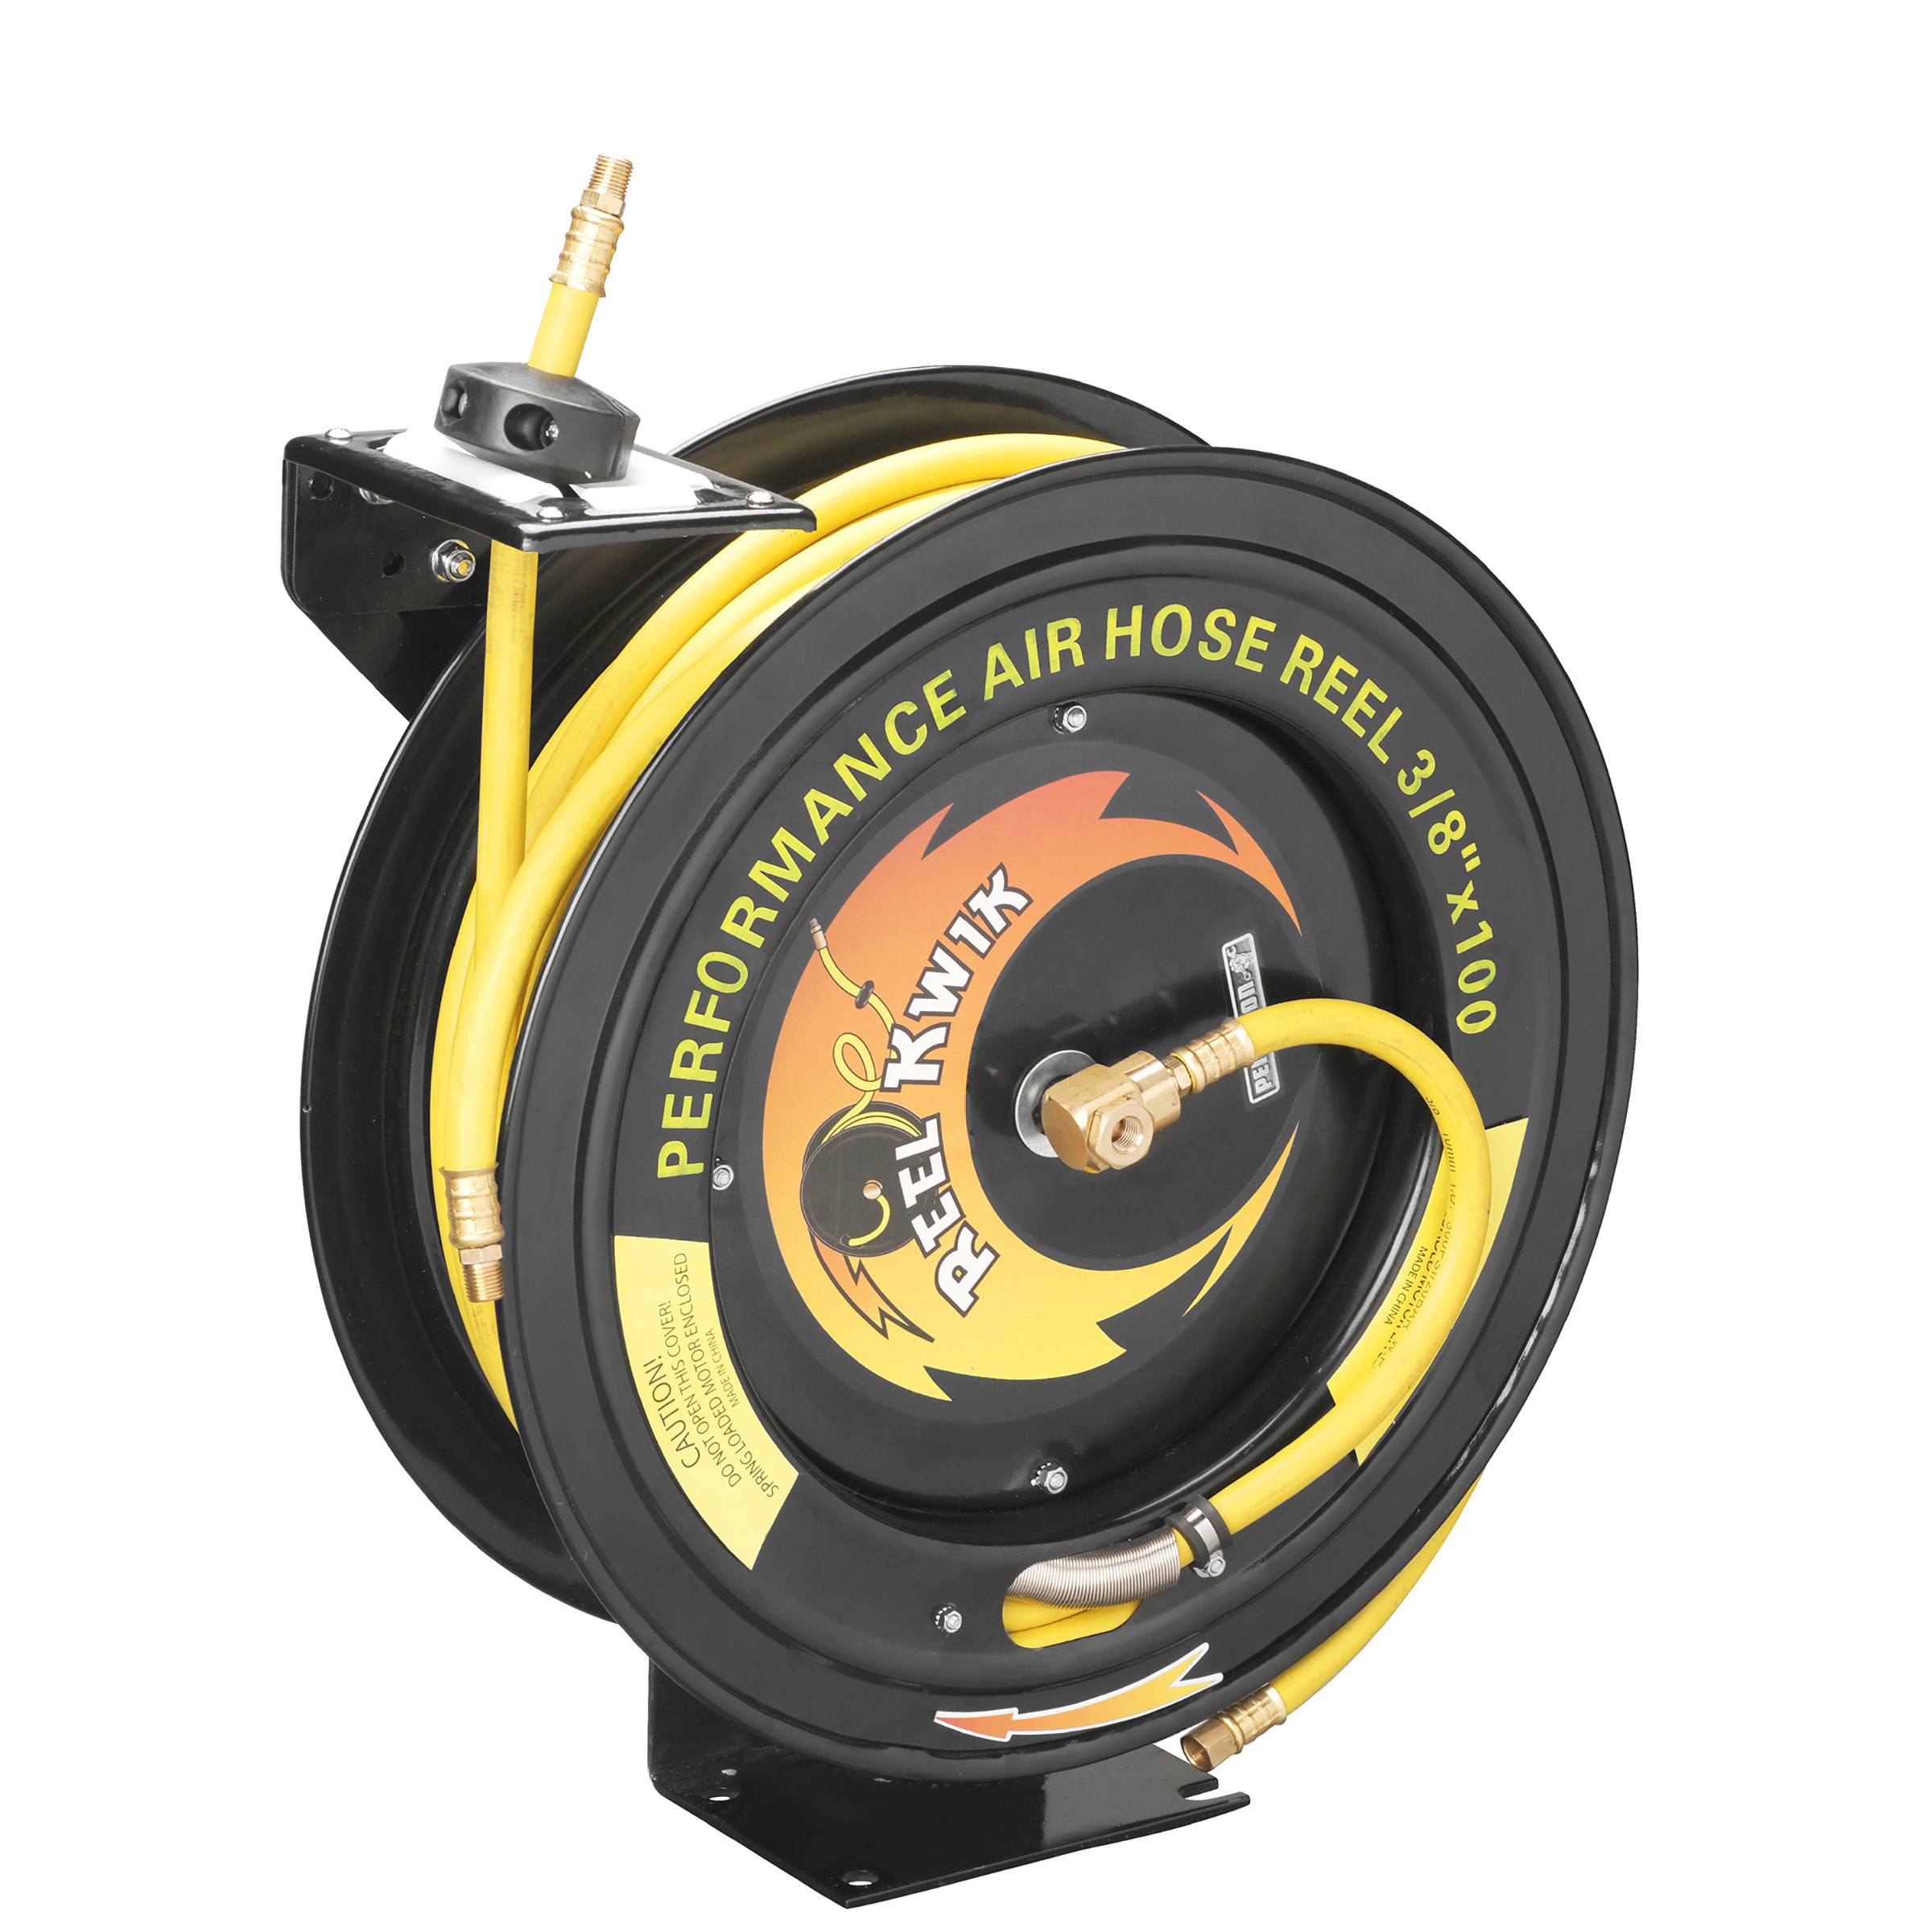 Fleming Supply Heavy Duty Retractable 100-foot Air Compressor Hose and Reel  By Pentagon Tools